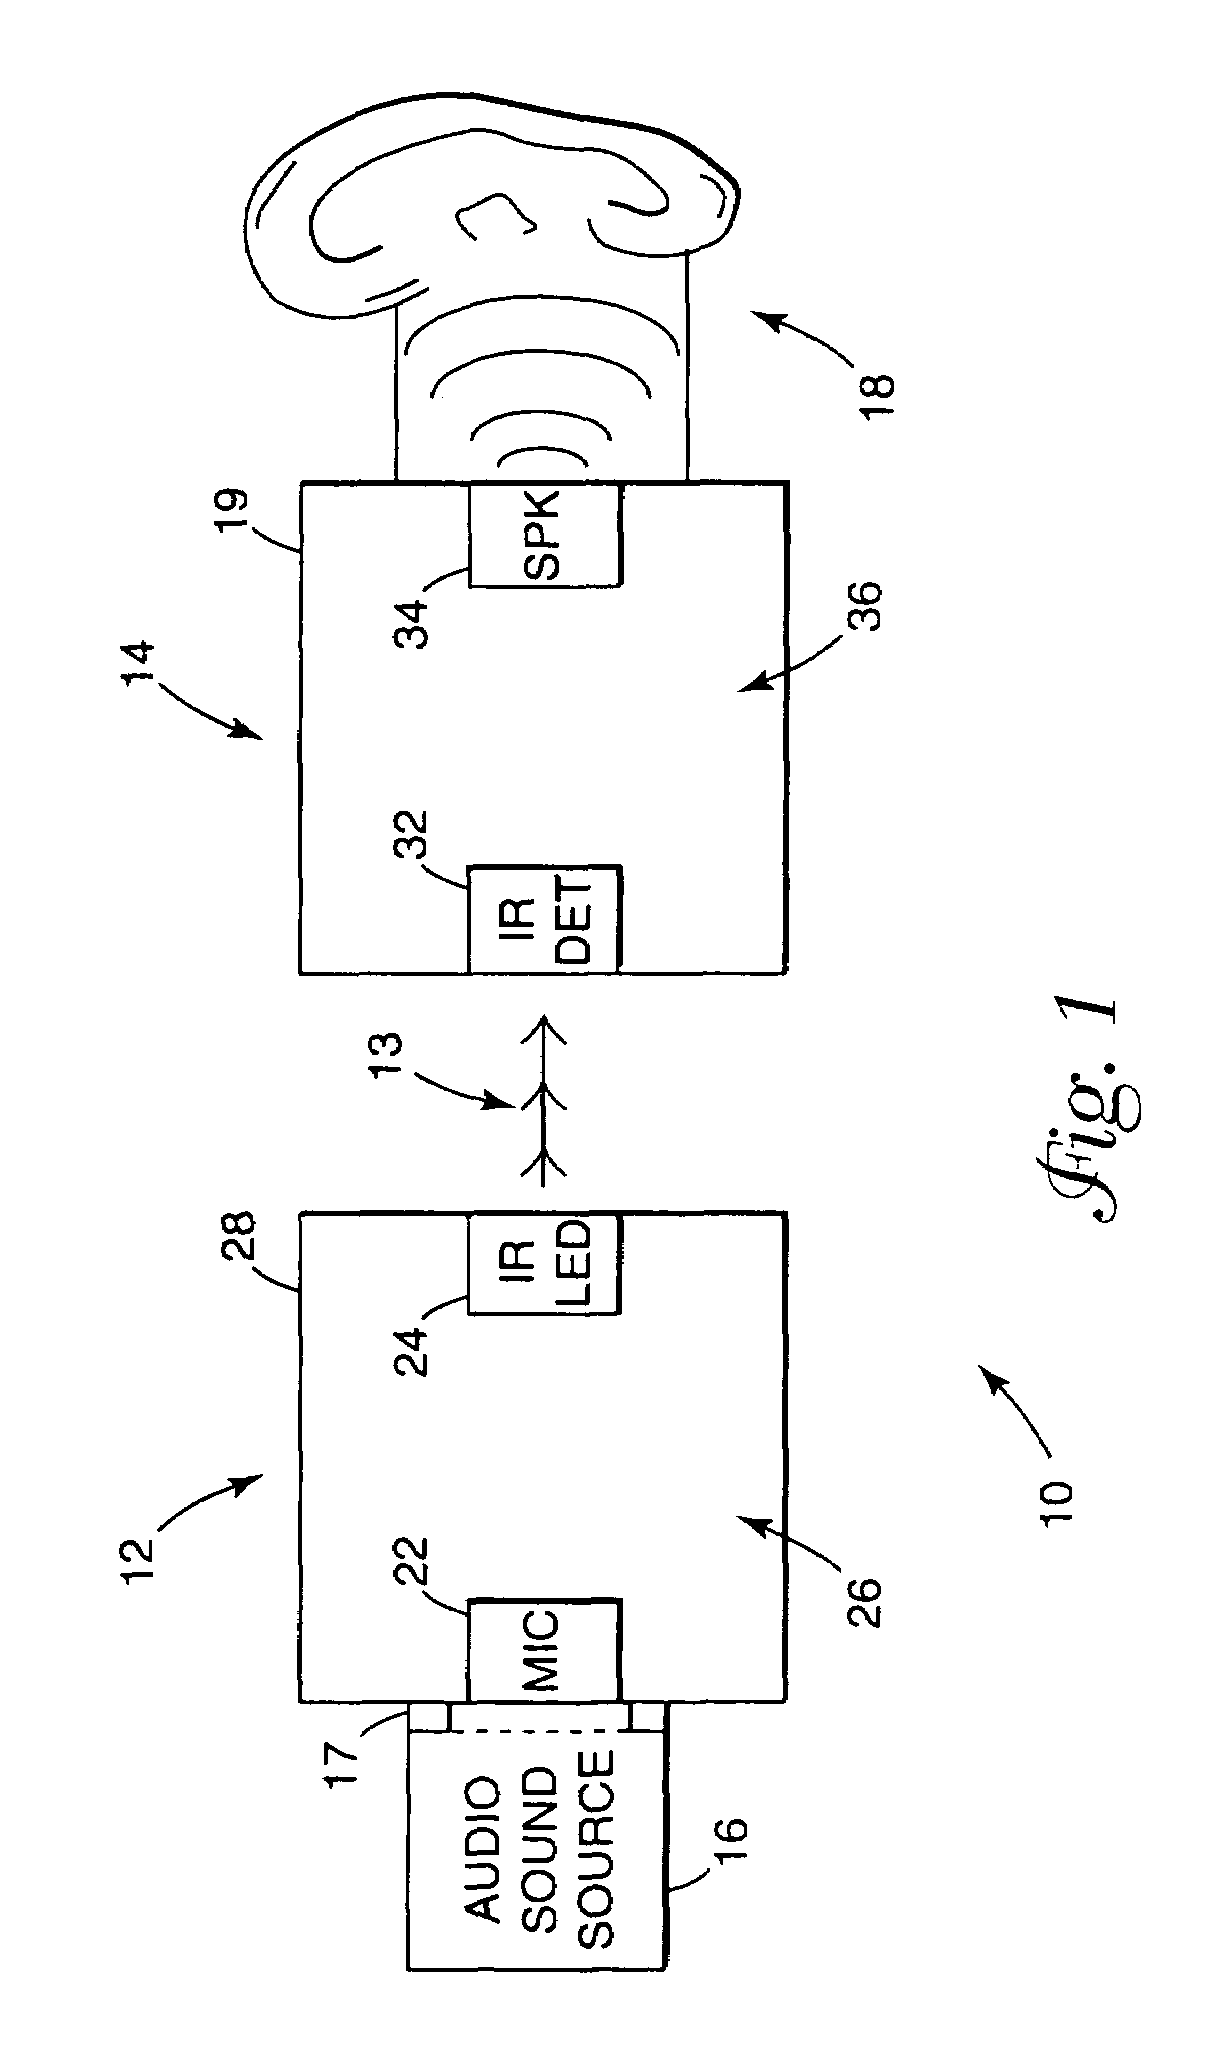 Low power portable communication system with wireless receiver and methods regarding same